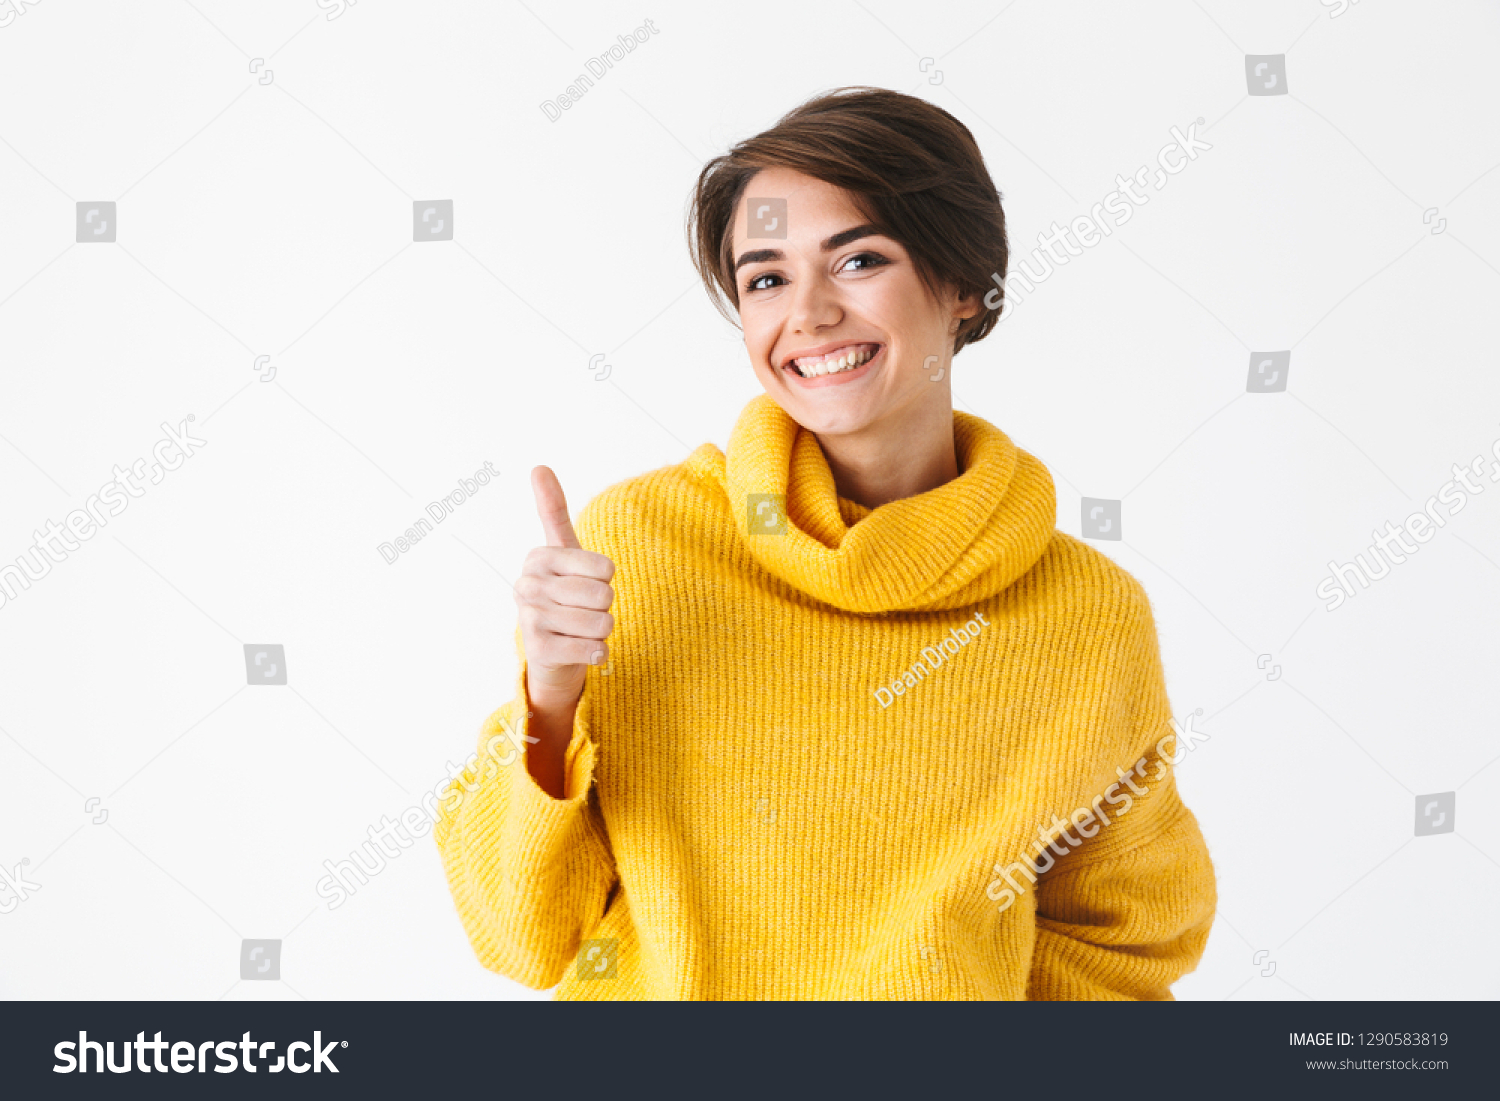 Happy cheerful girl wearing hoodie standing isolated over white background, thumbs up #1290583819